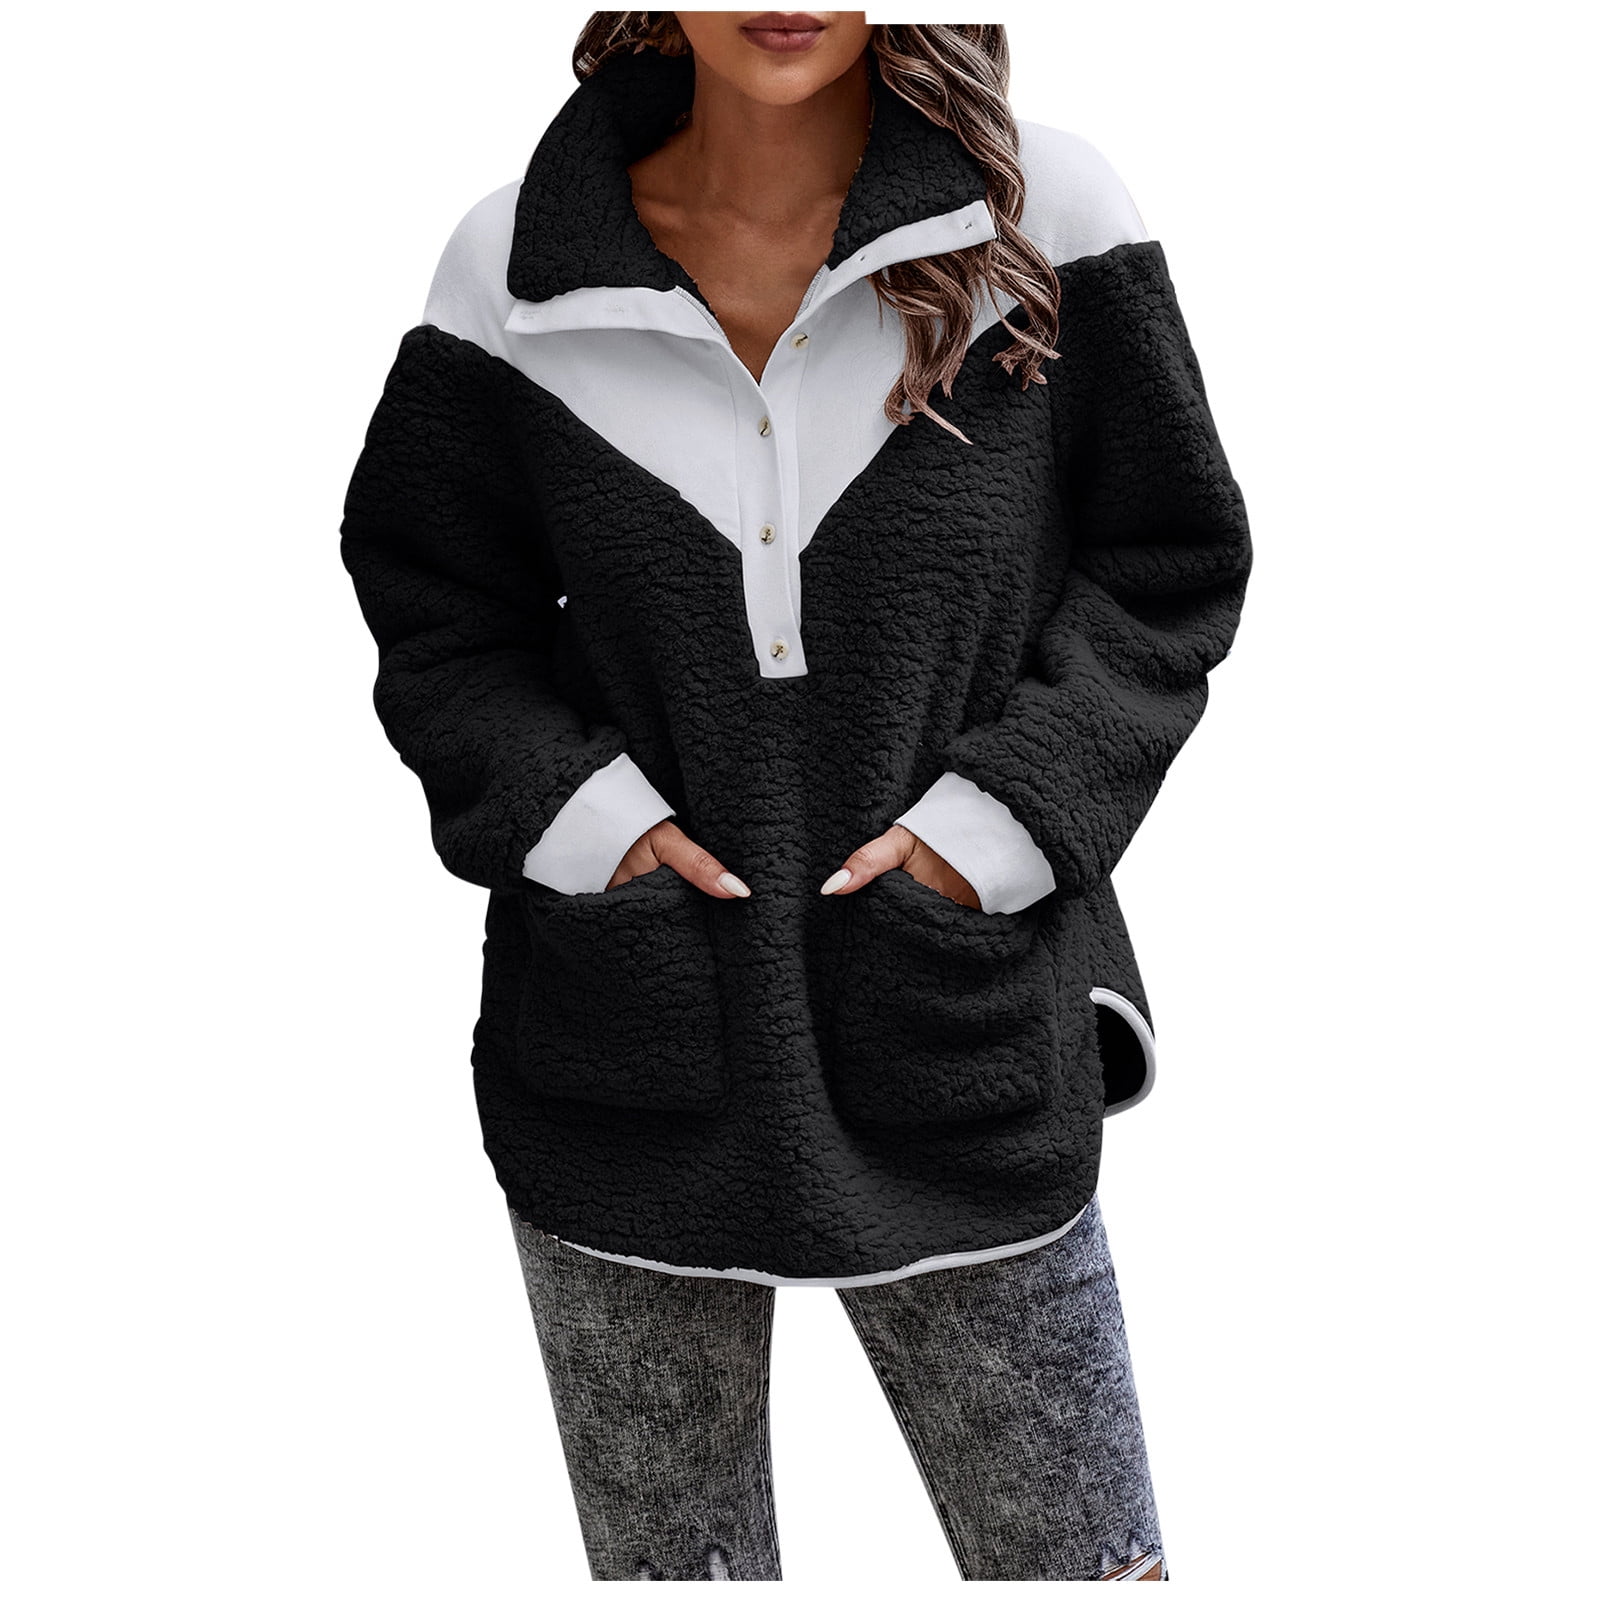  OutTop Quilted Fleece Lined Jacket Coats for Women